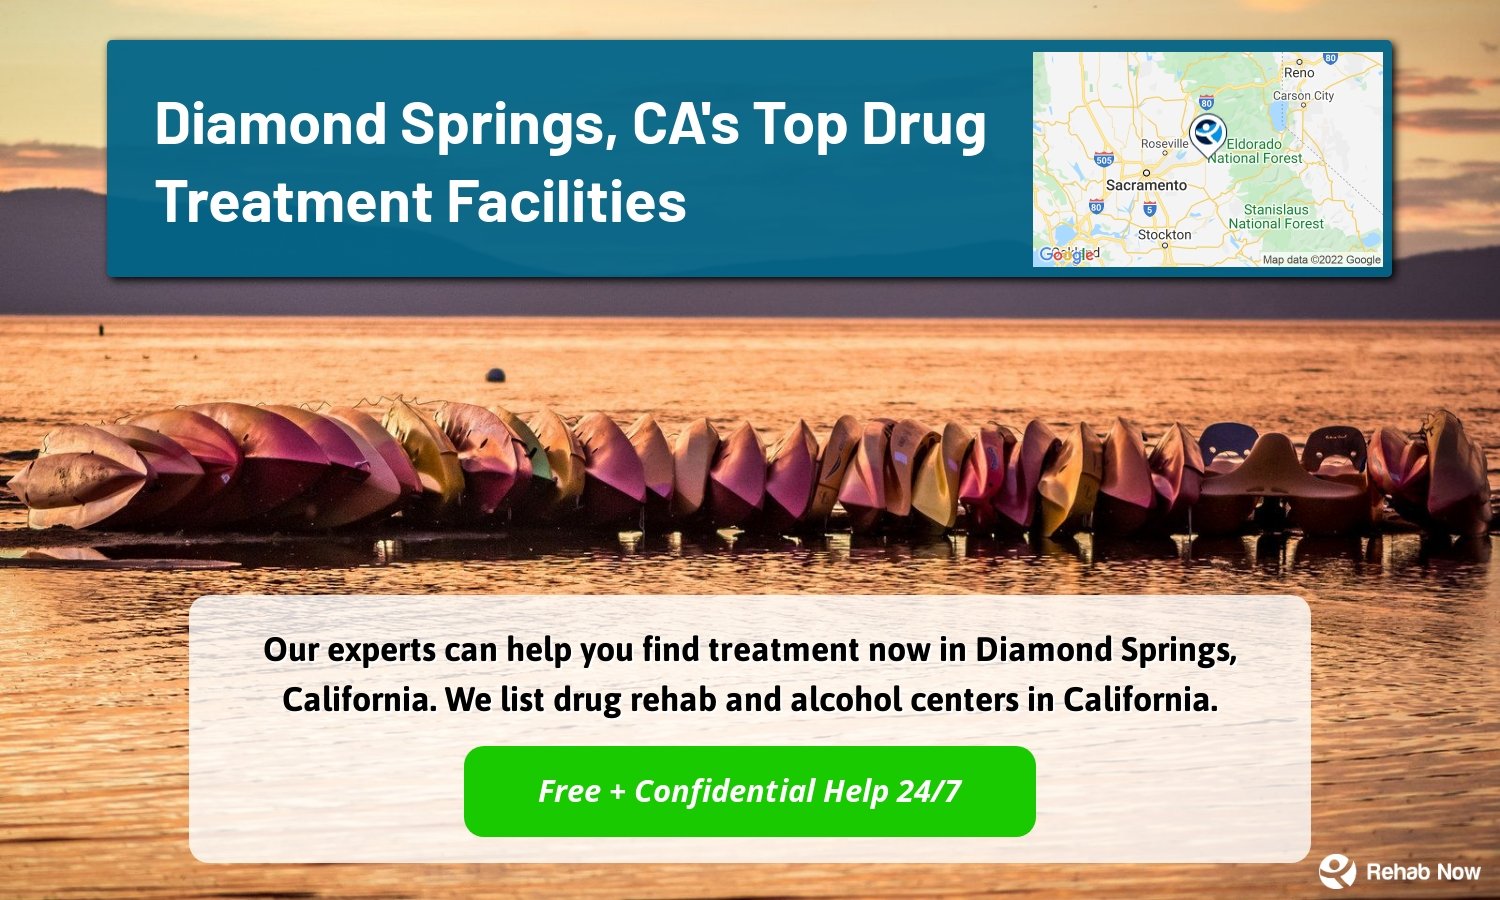 Our experts can help you find treatment now in Diamond Springs, California. We list drug rehab and alcohol centers in California.